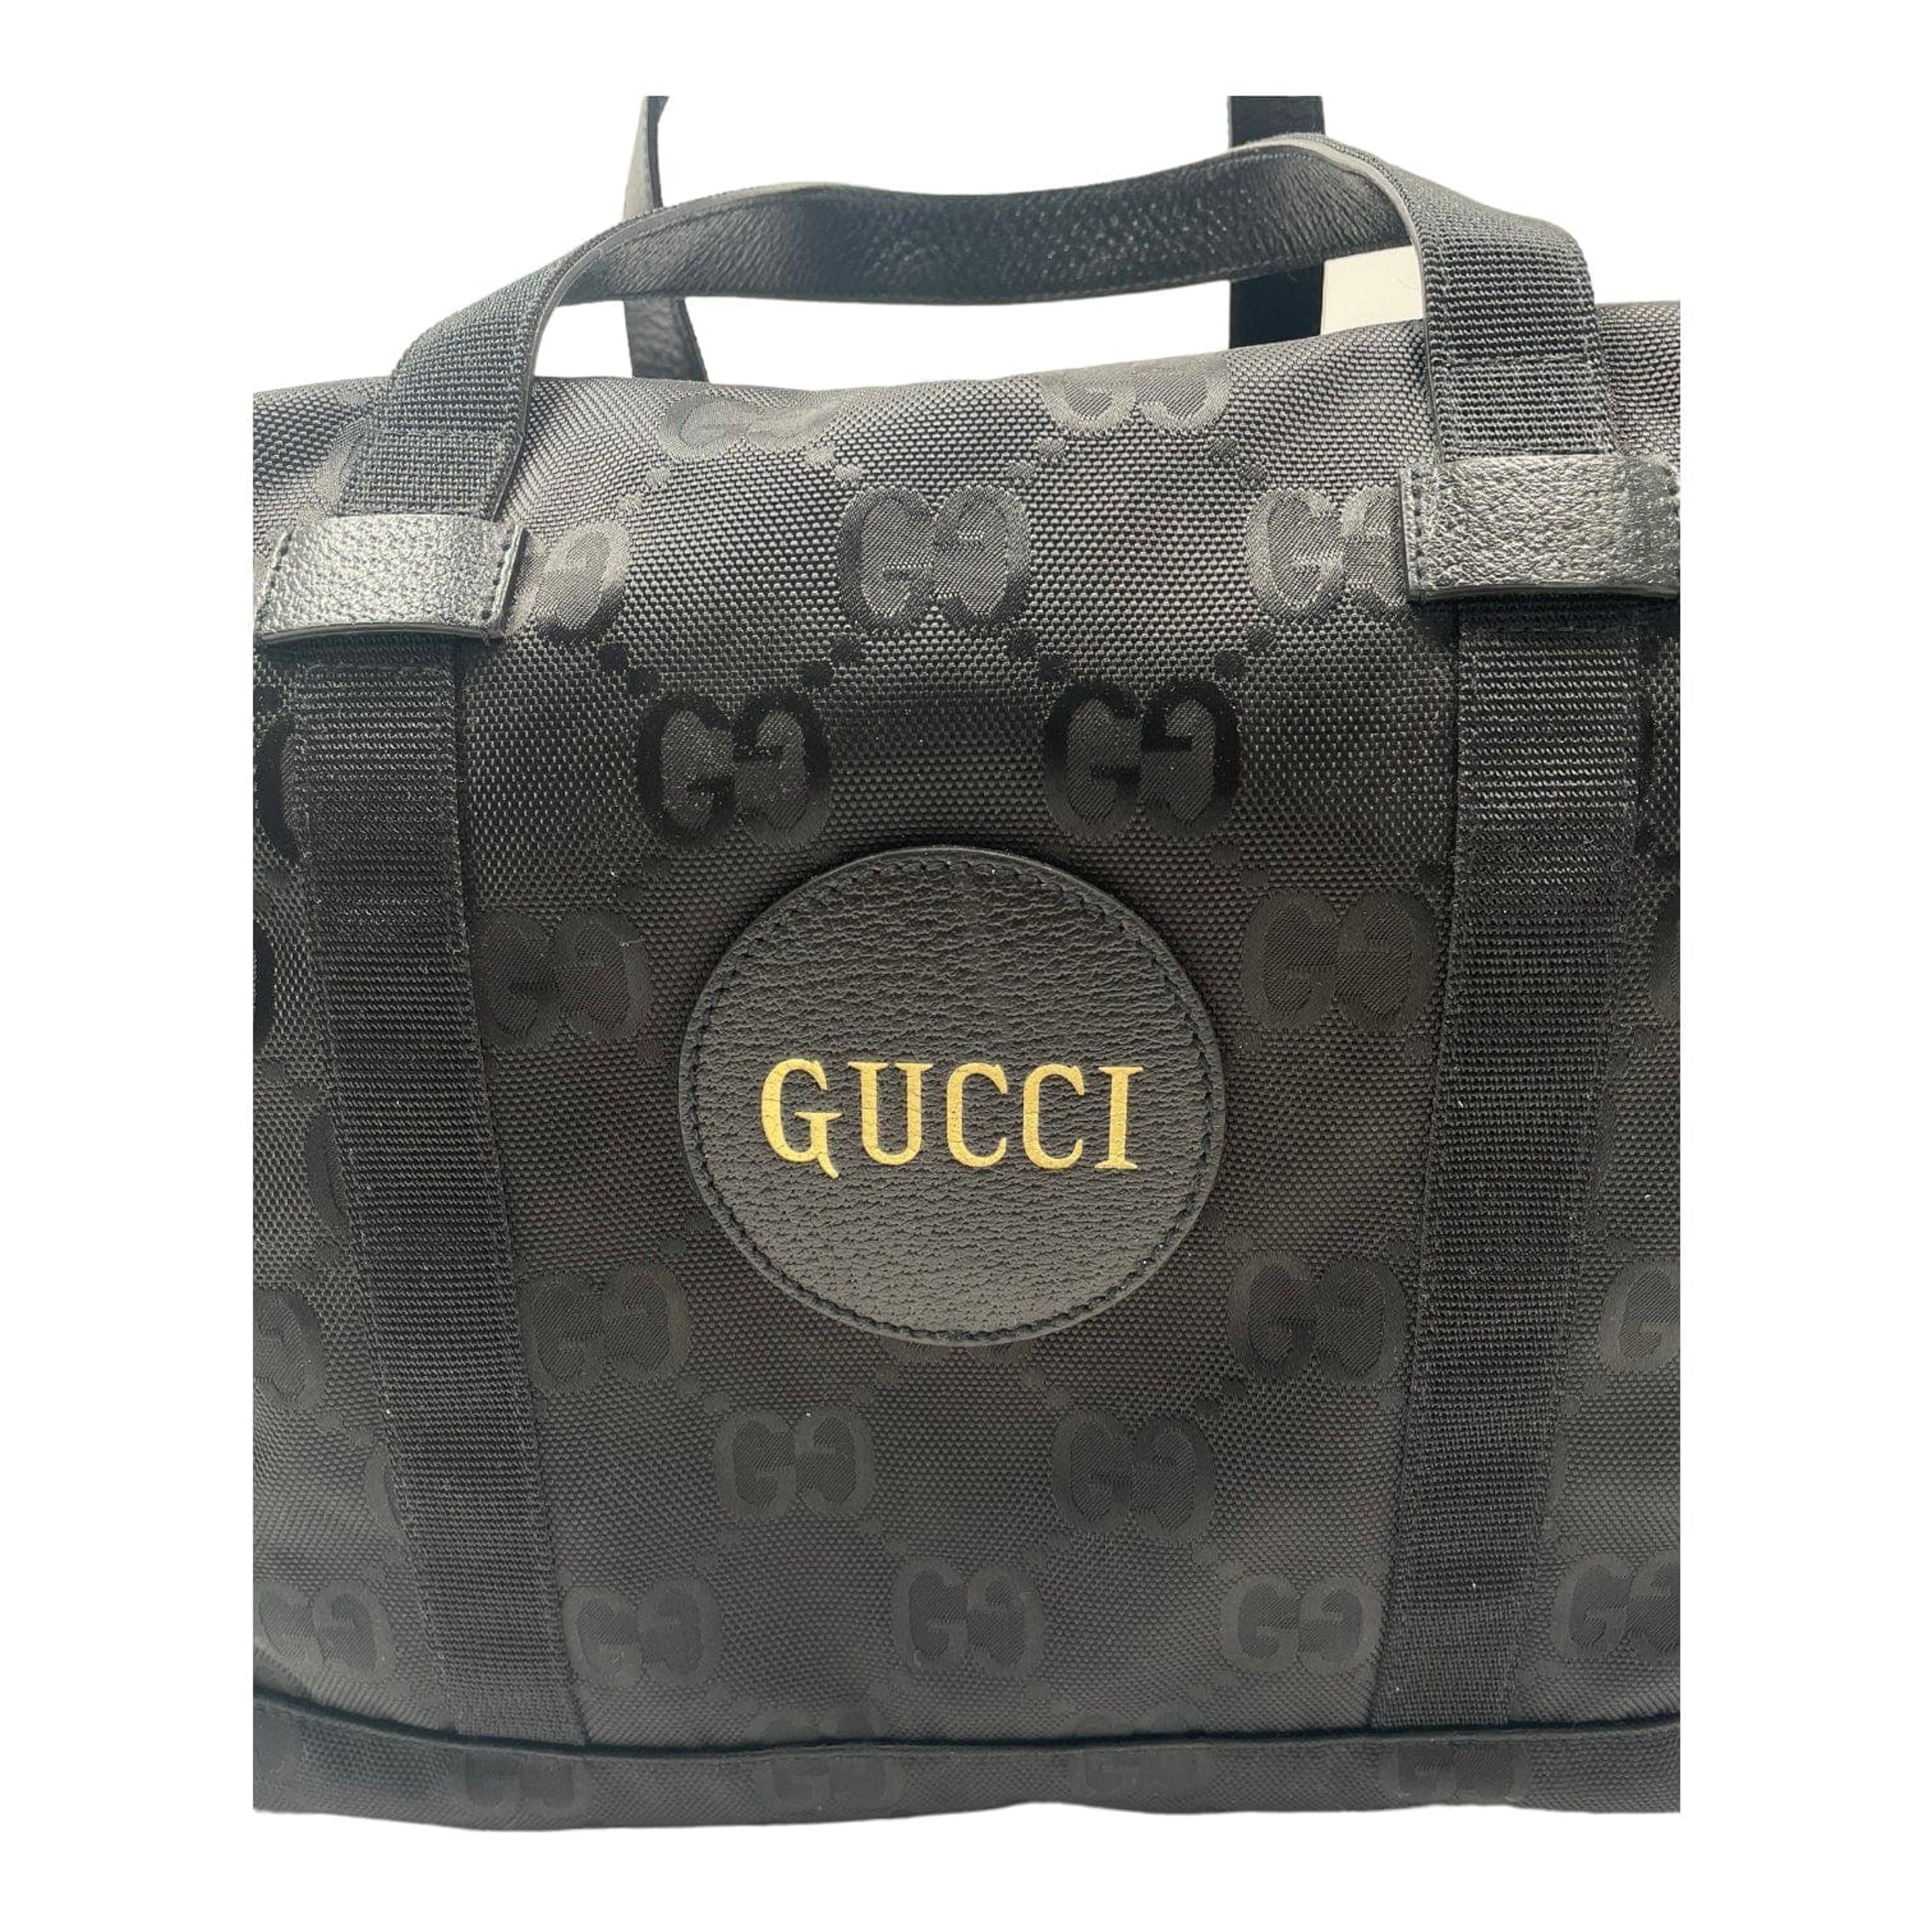 Alternate View 3 of Gucci Off The Grid Duffle Bag Black Pre-Owned